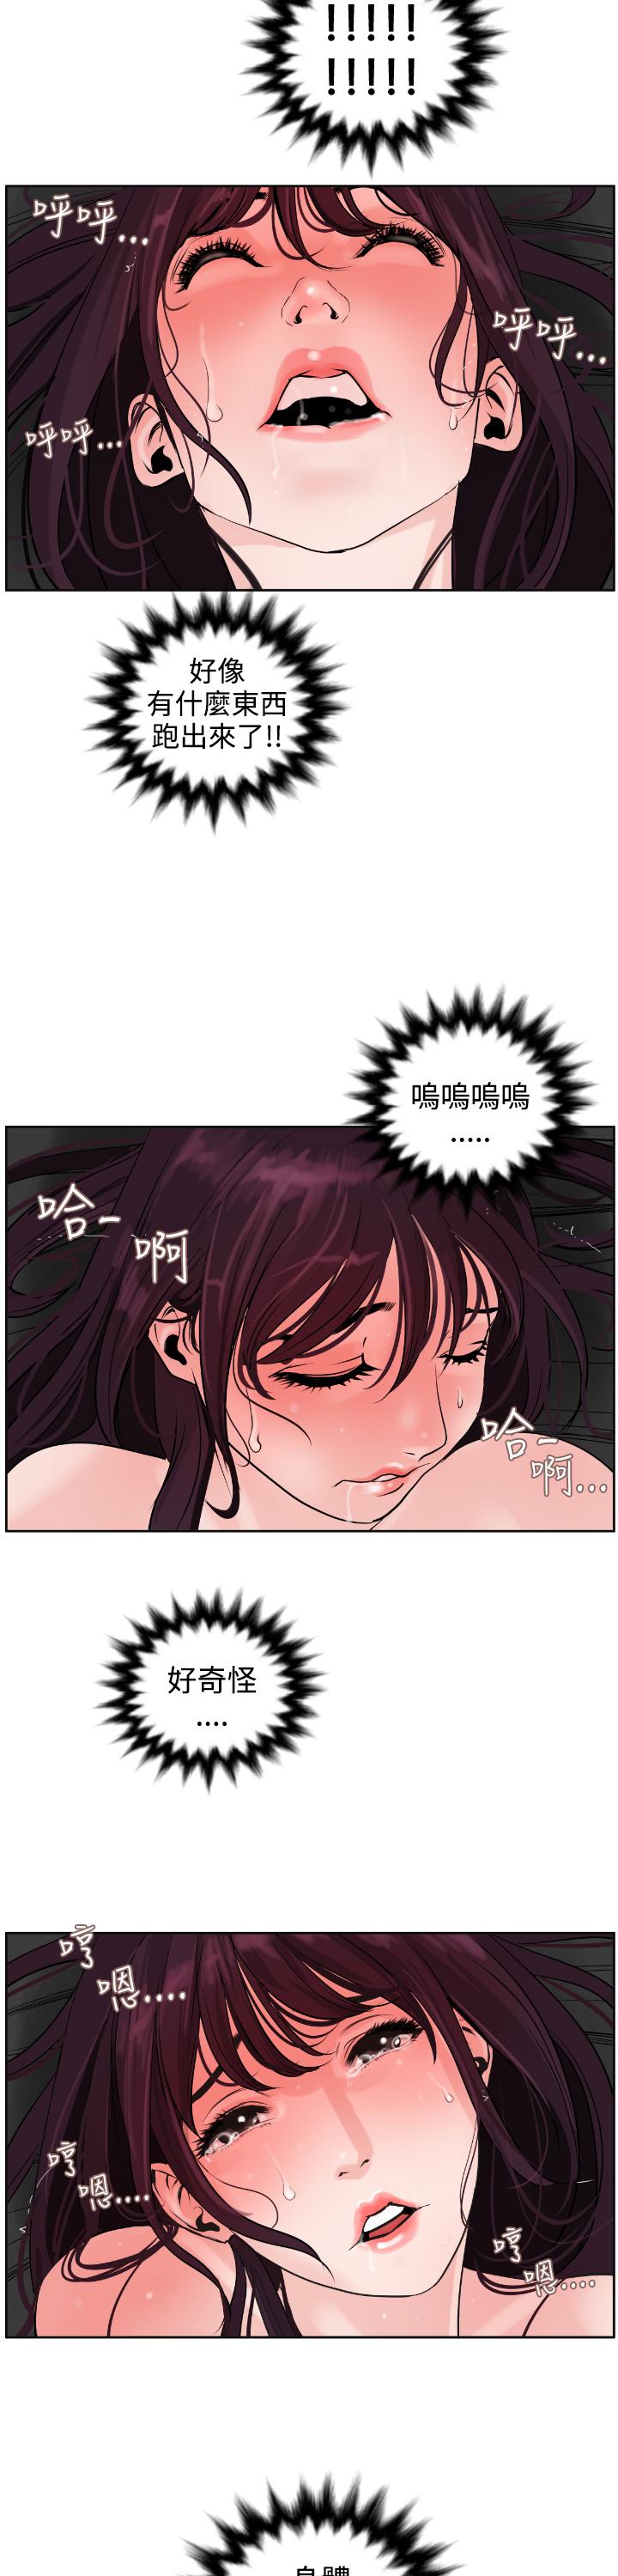 Desire King (慾求王) Ch.1-16 (chinese) 229